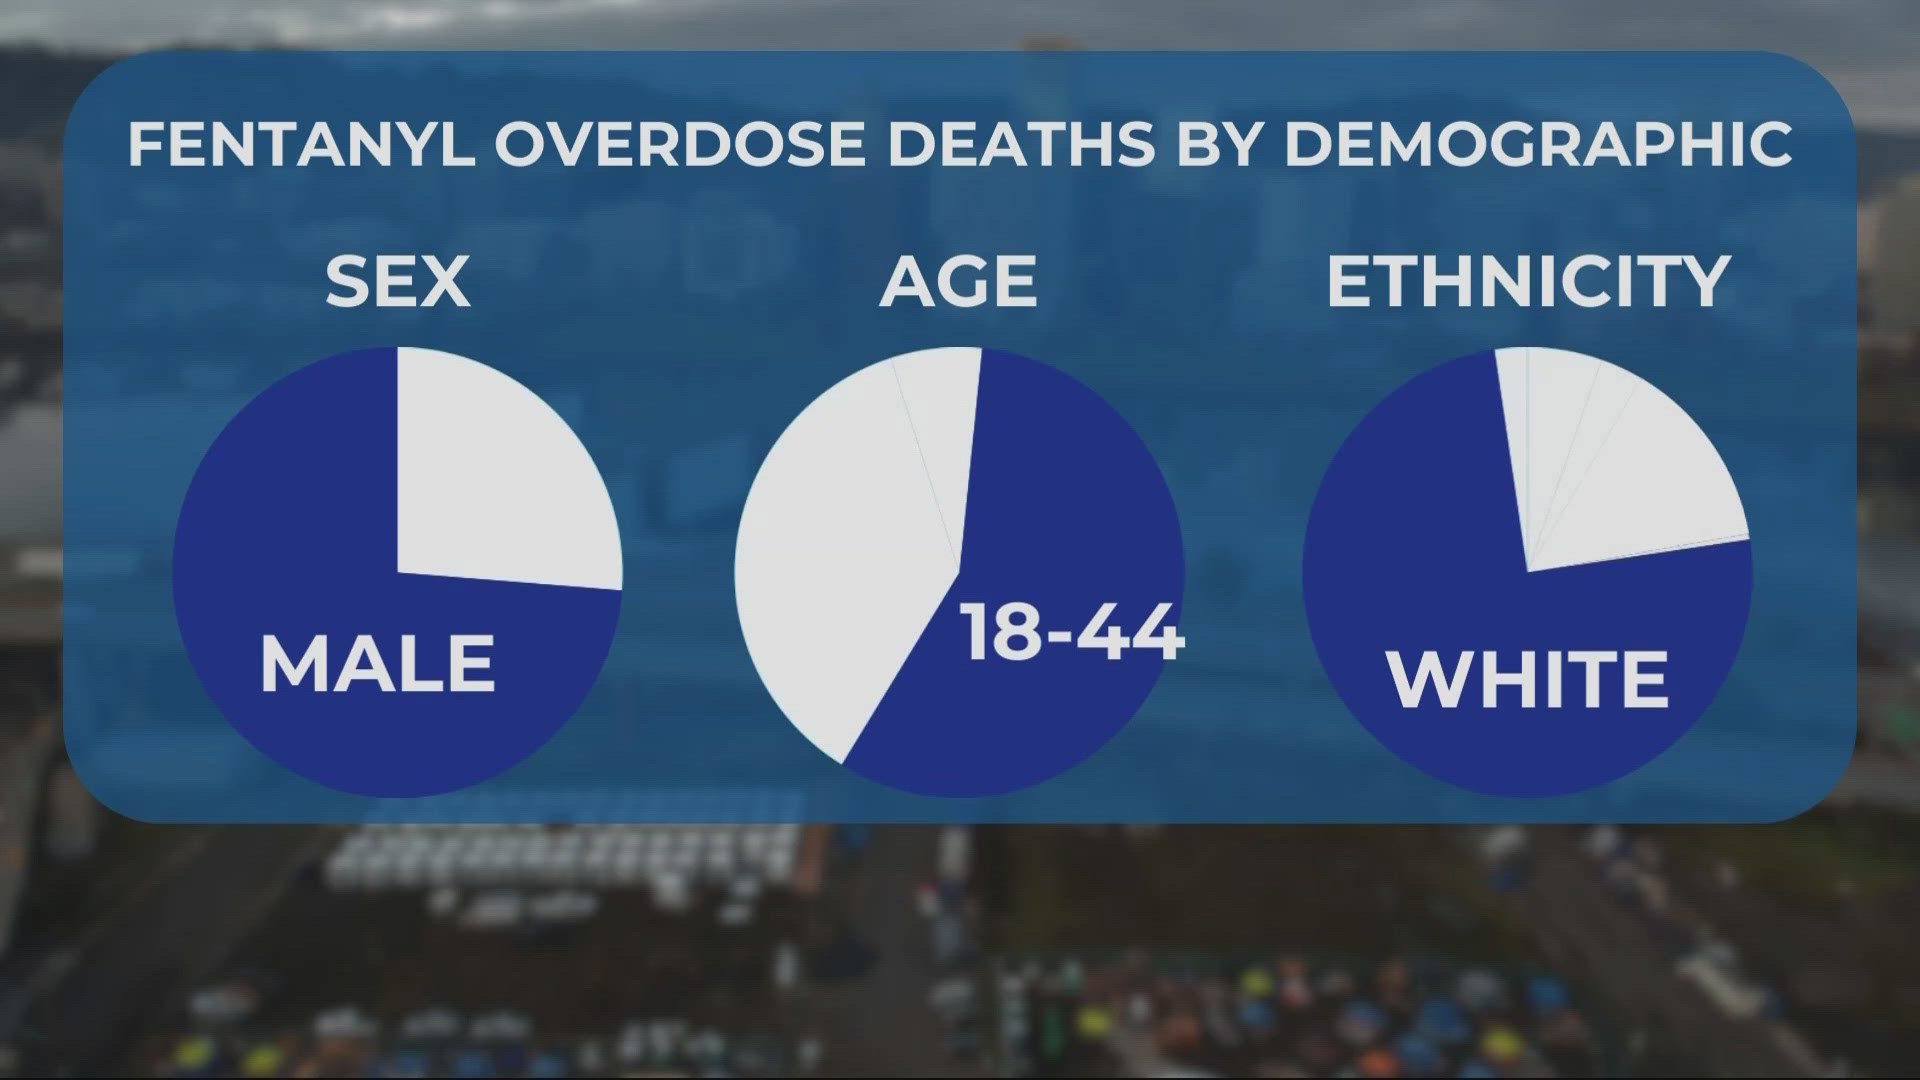 The Multnomah County Health Department released a report on those who died from a fentanyl overdose, which increased year by year.